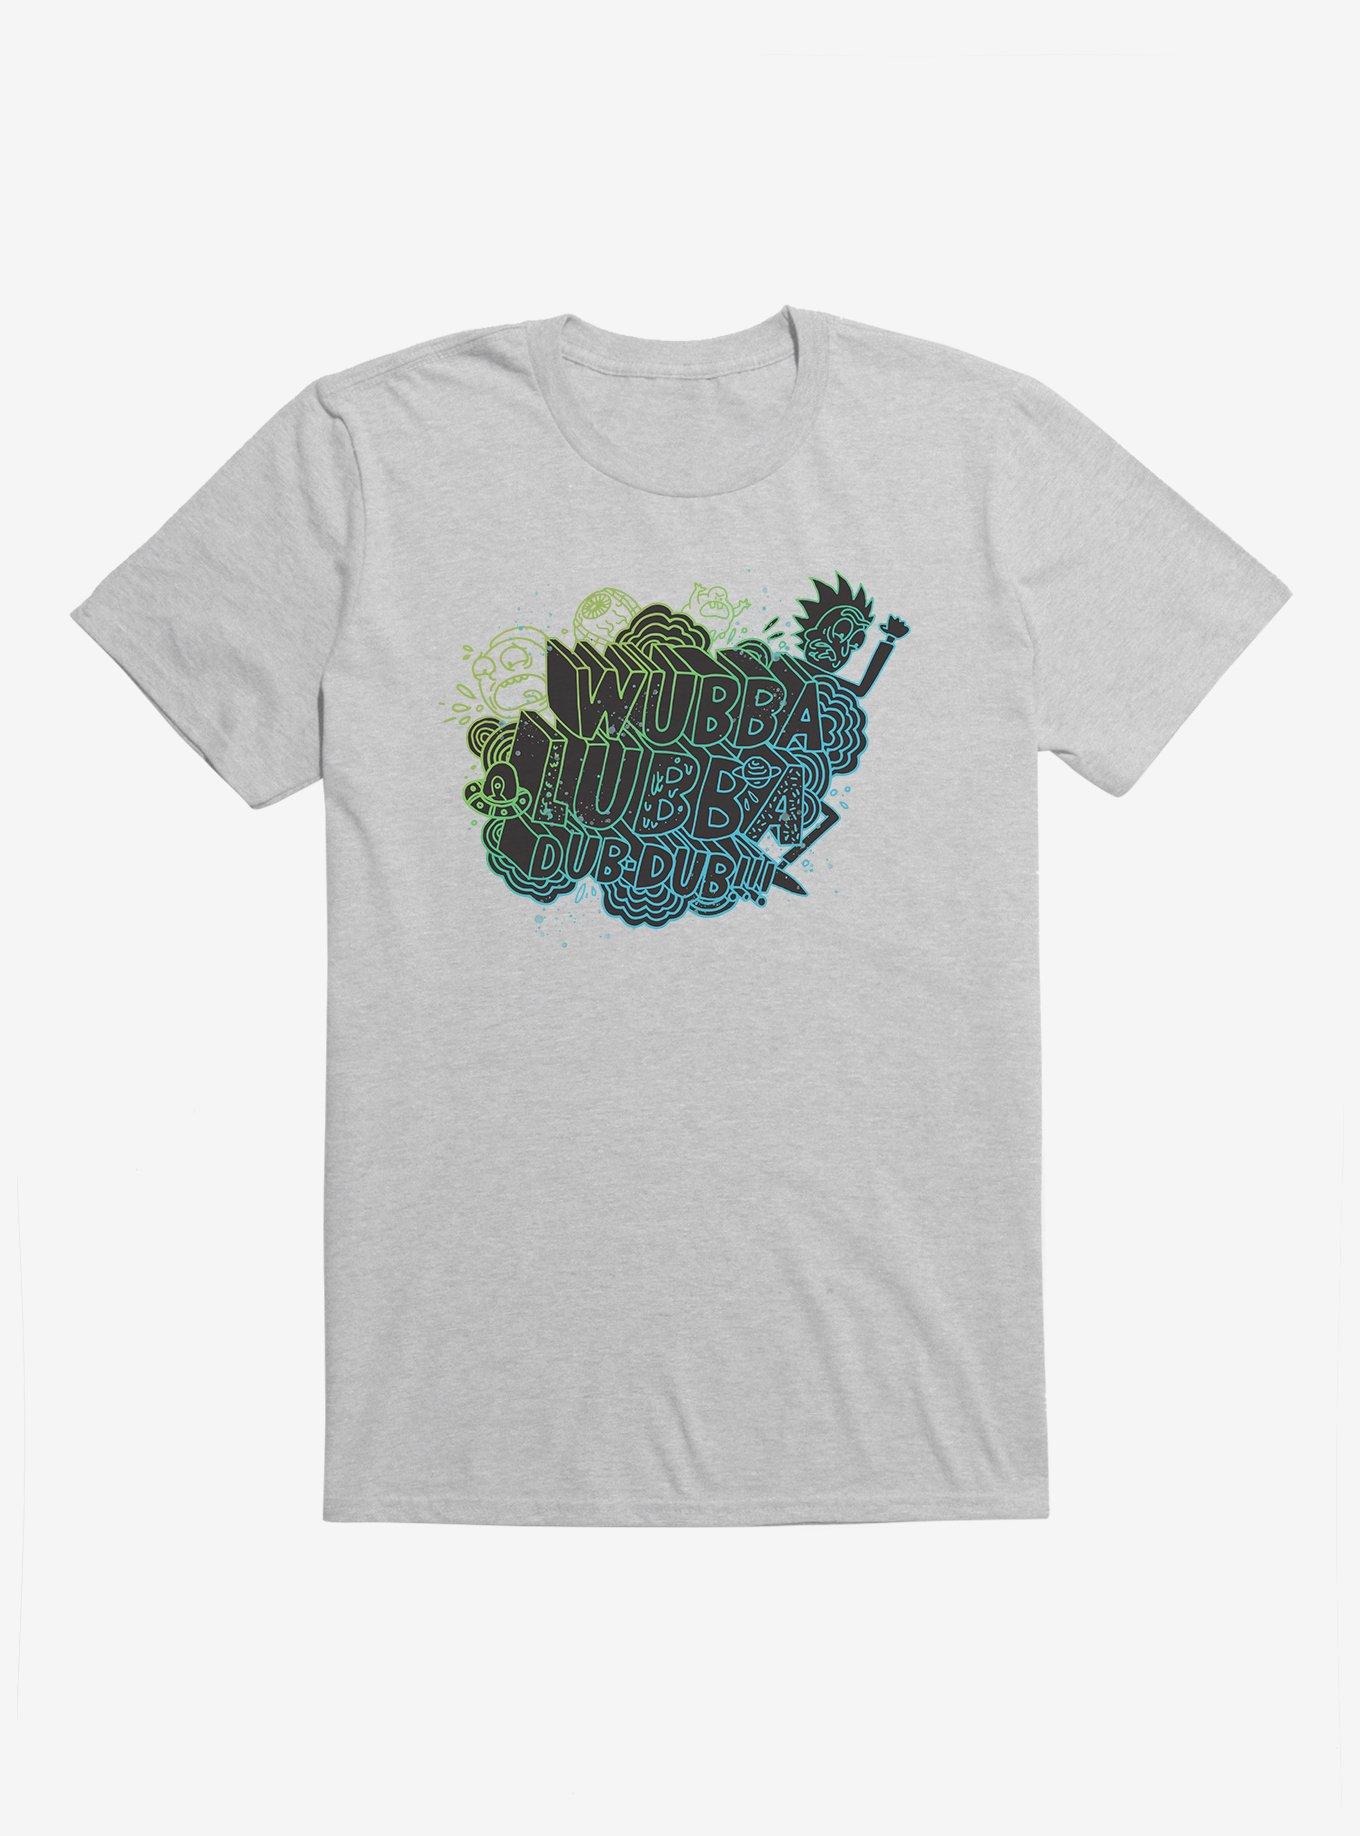 Rick And Morty Wubba Lubba Dub Dub Outline T-Shirt, HEATHER GREY, hi-res